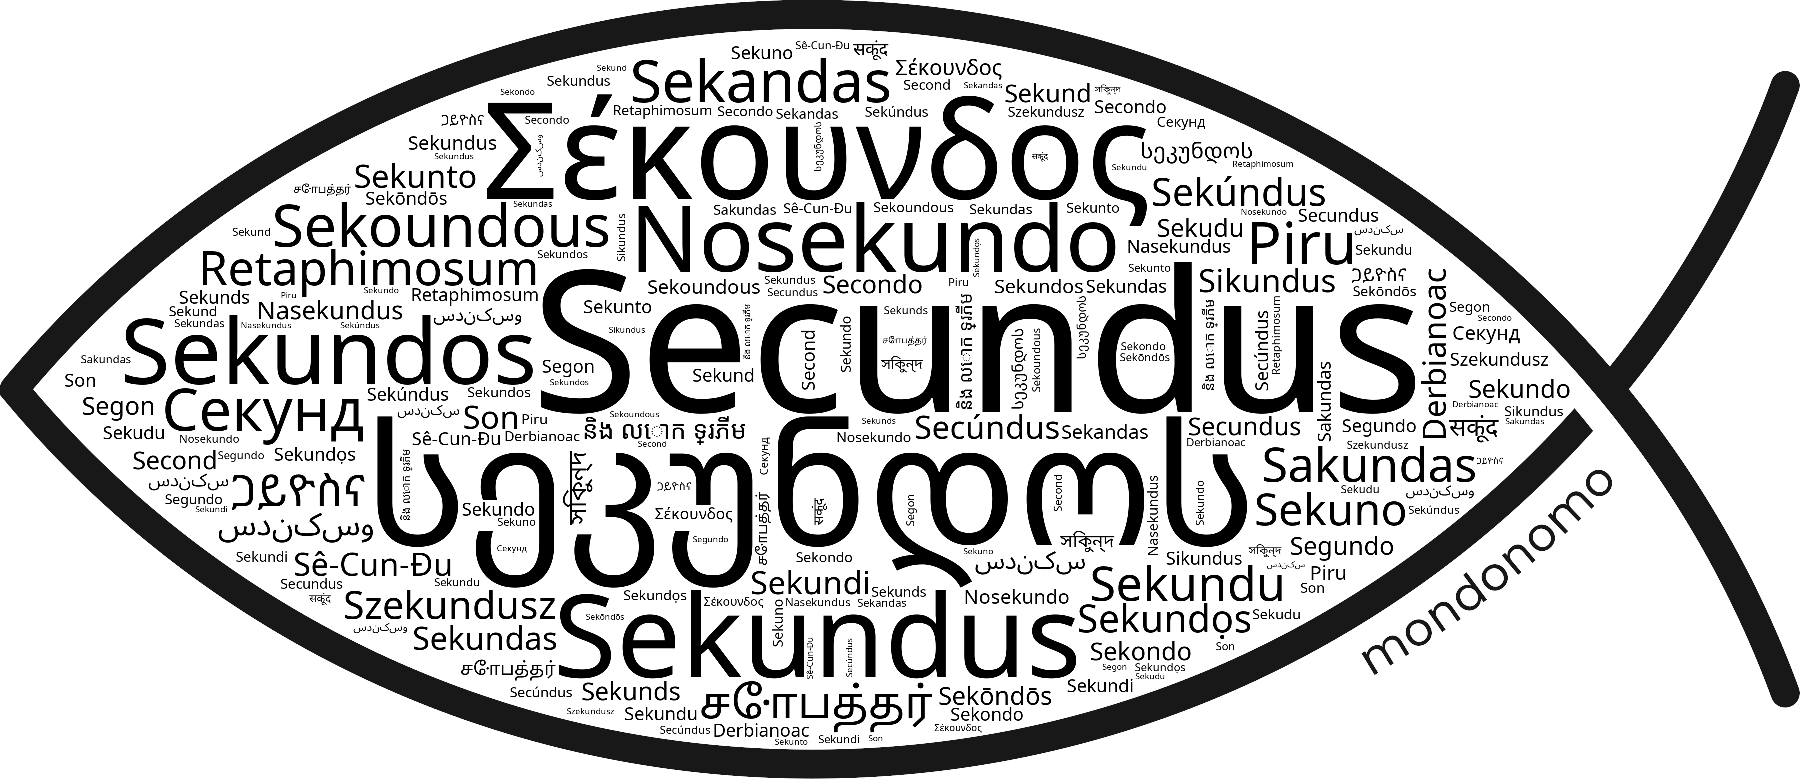 Name Secundus in the world's Bibles